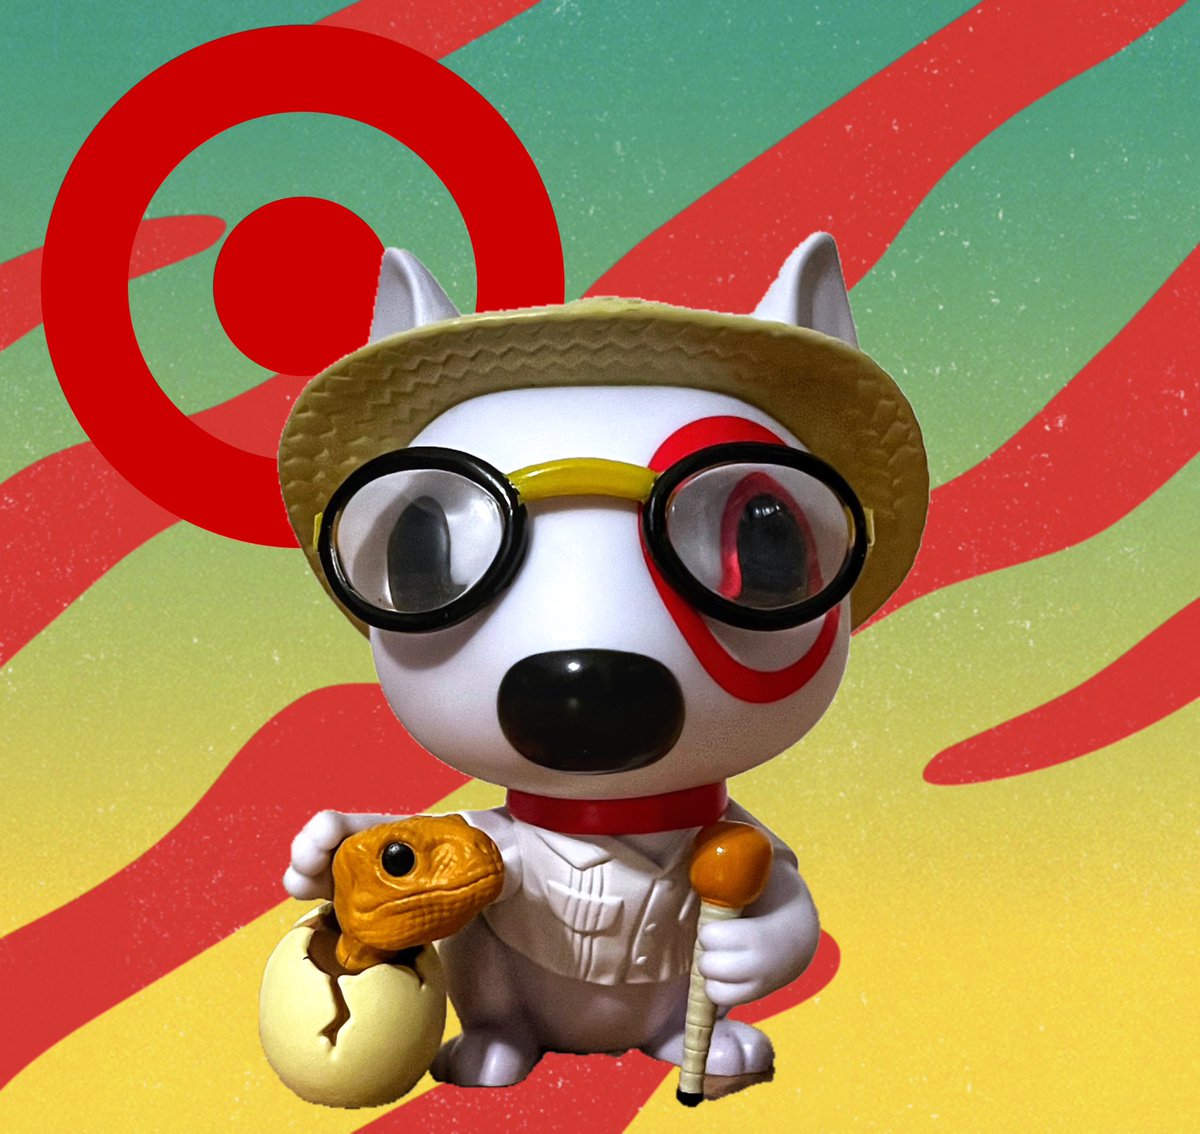 Bullseye's all set to be hitting up the next Comic-Con! First up swinging into action (as Spidey) then welcoming you to Jurassic Park (as Dr. Hammond) Funko Pops! NEW to the Collection. #Bullseye #Funko #funkopop #Target #Exclusive #TargetFinds #TargetRun #funkophotoadaychallenge